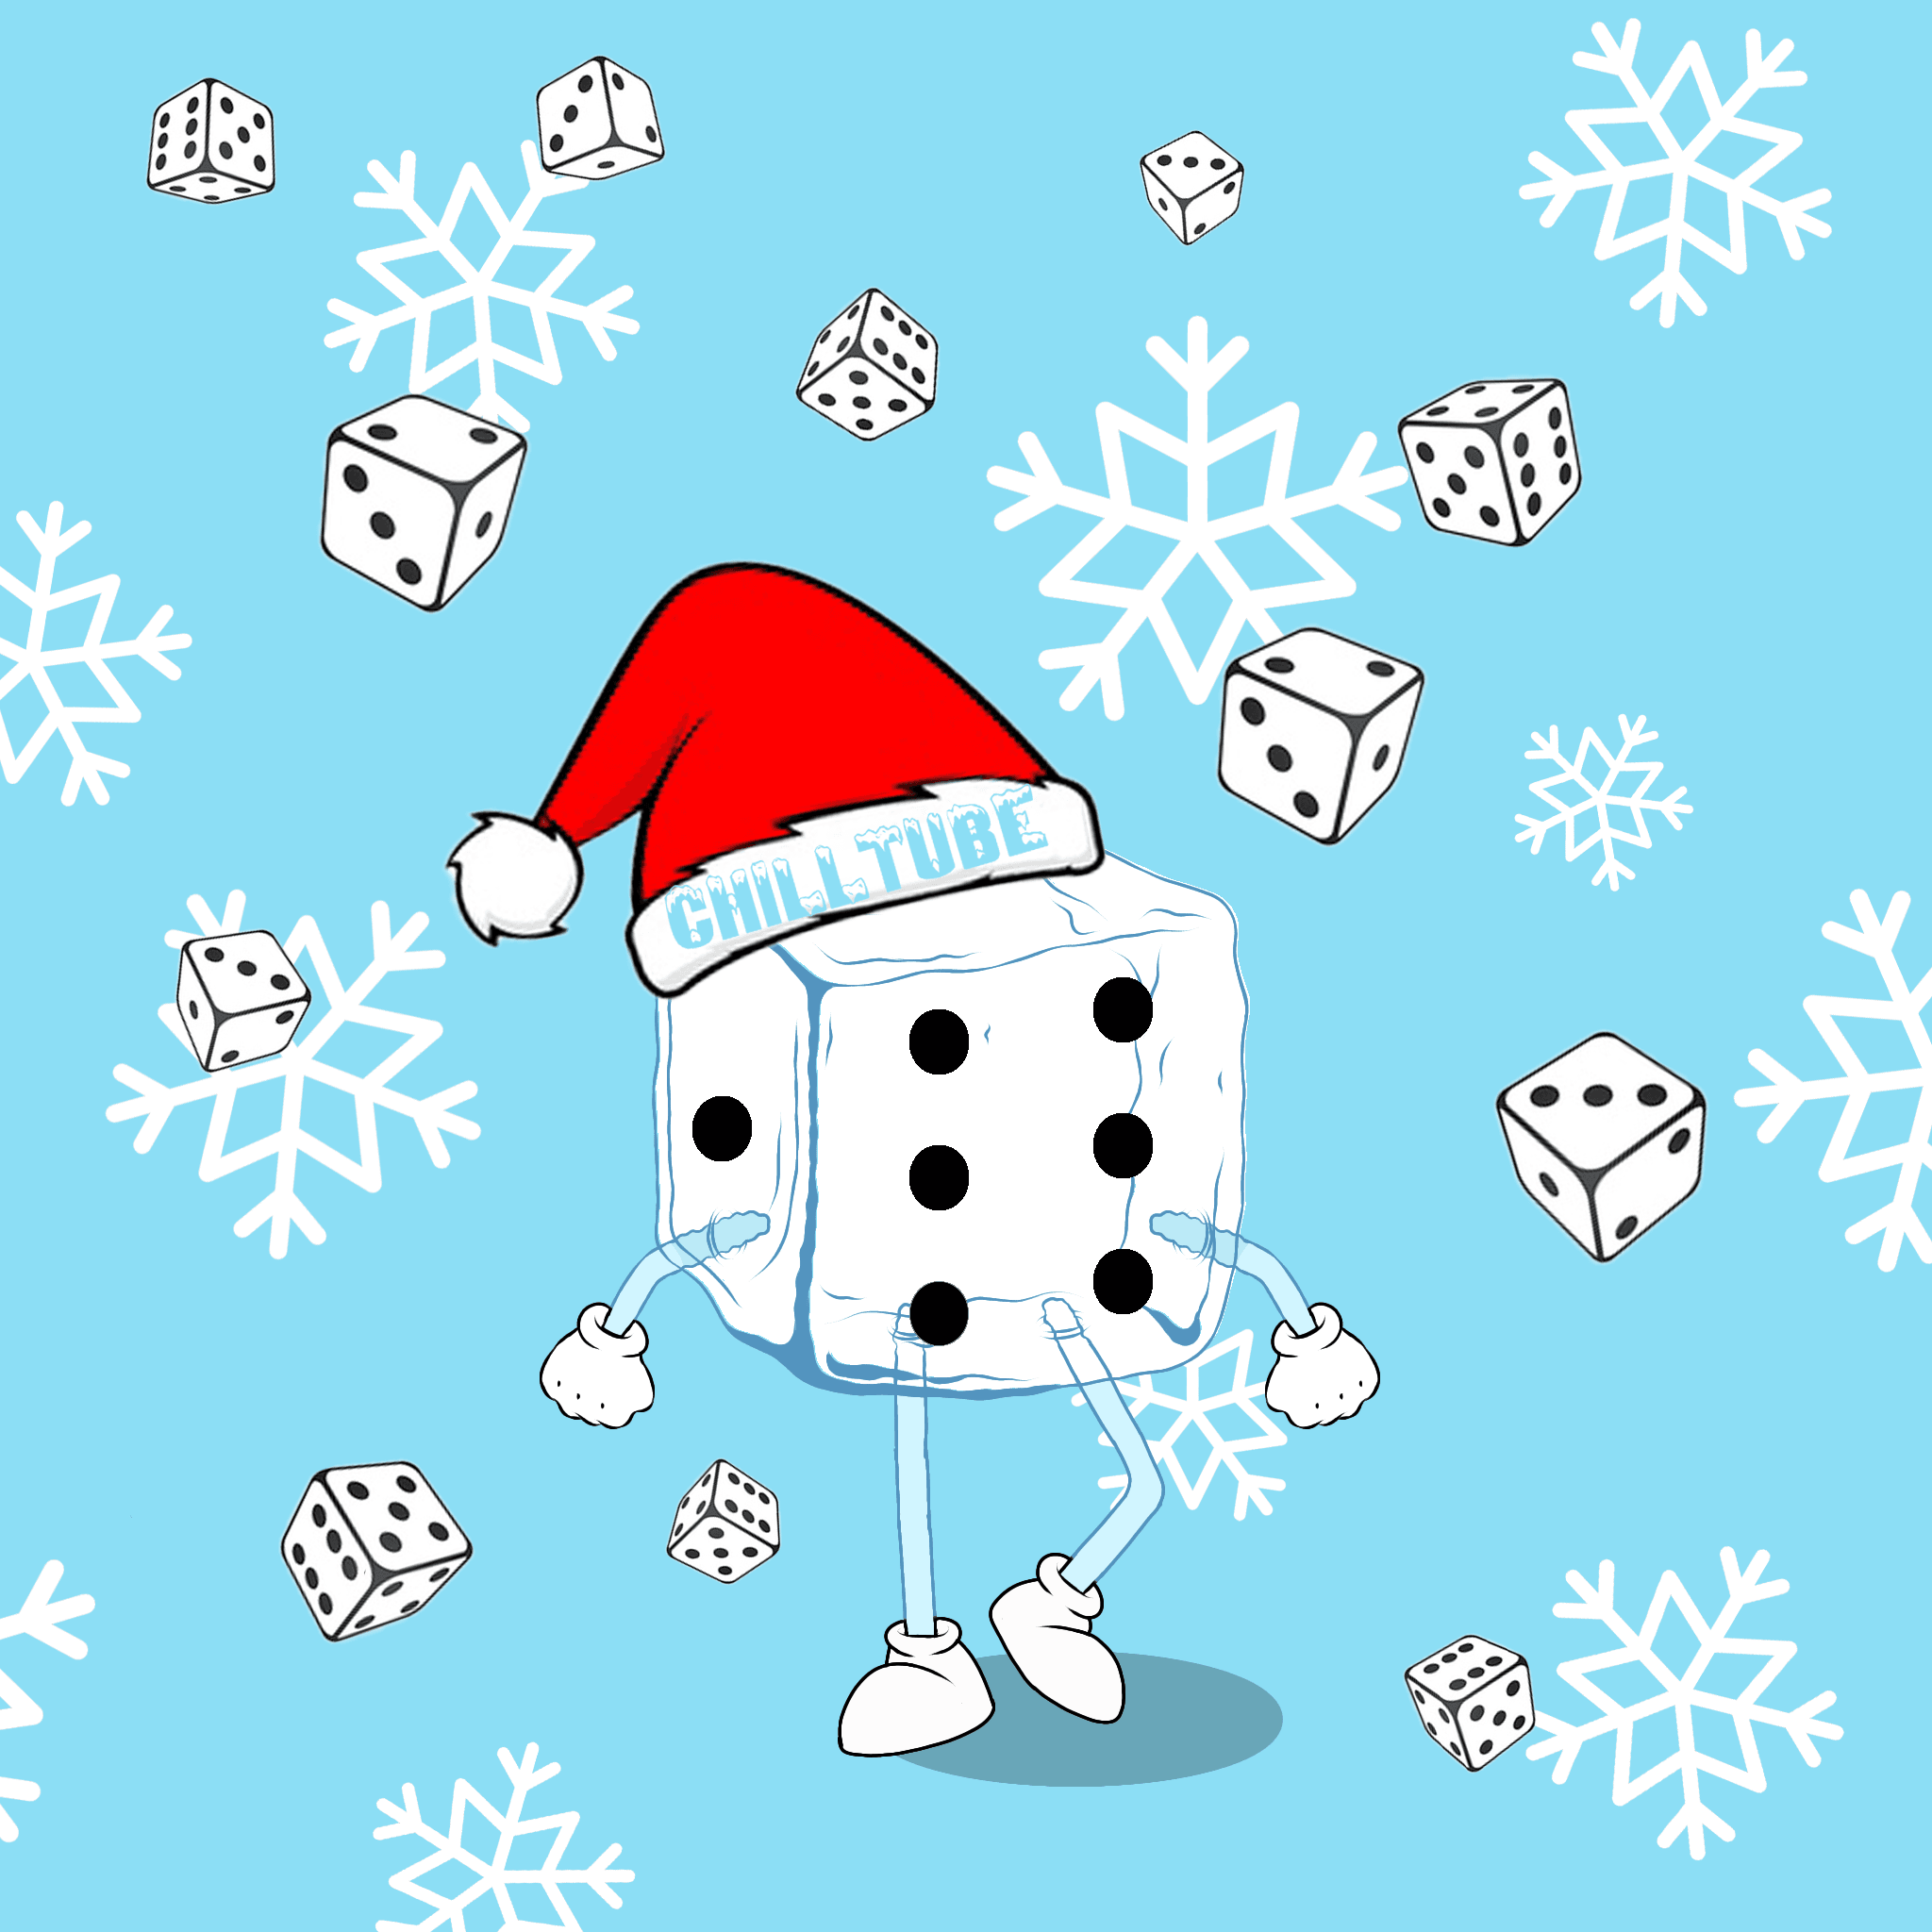 Chilly ChillDice ( December Edition )